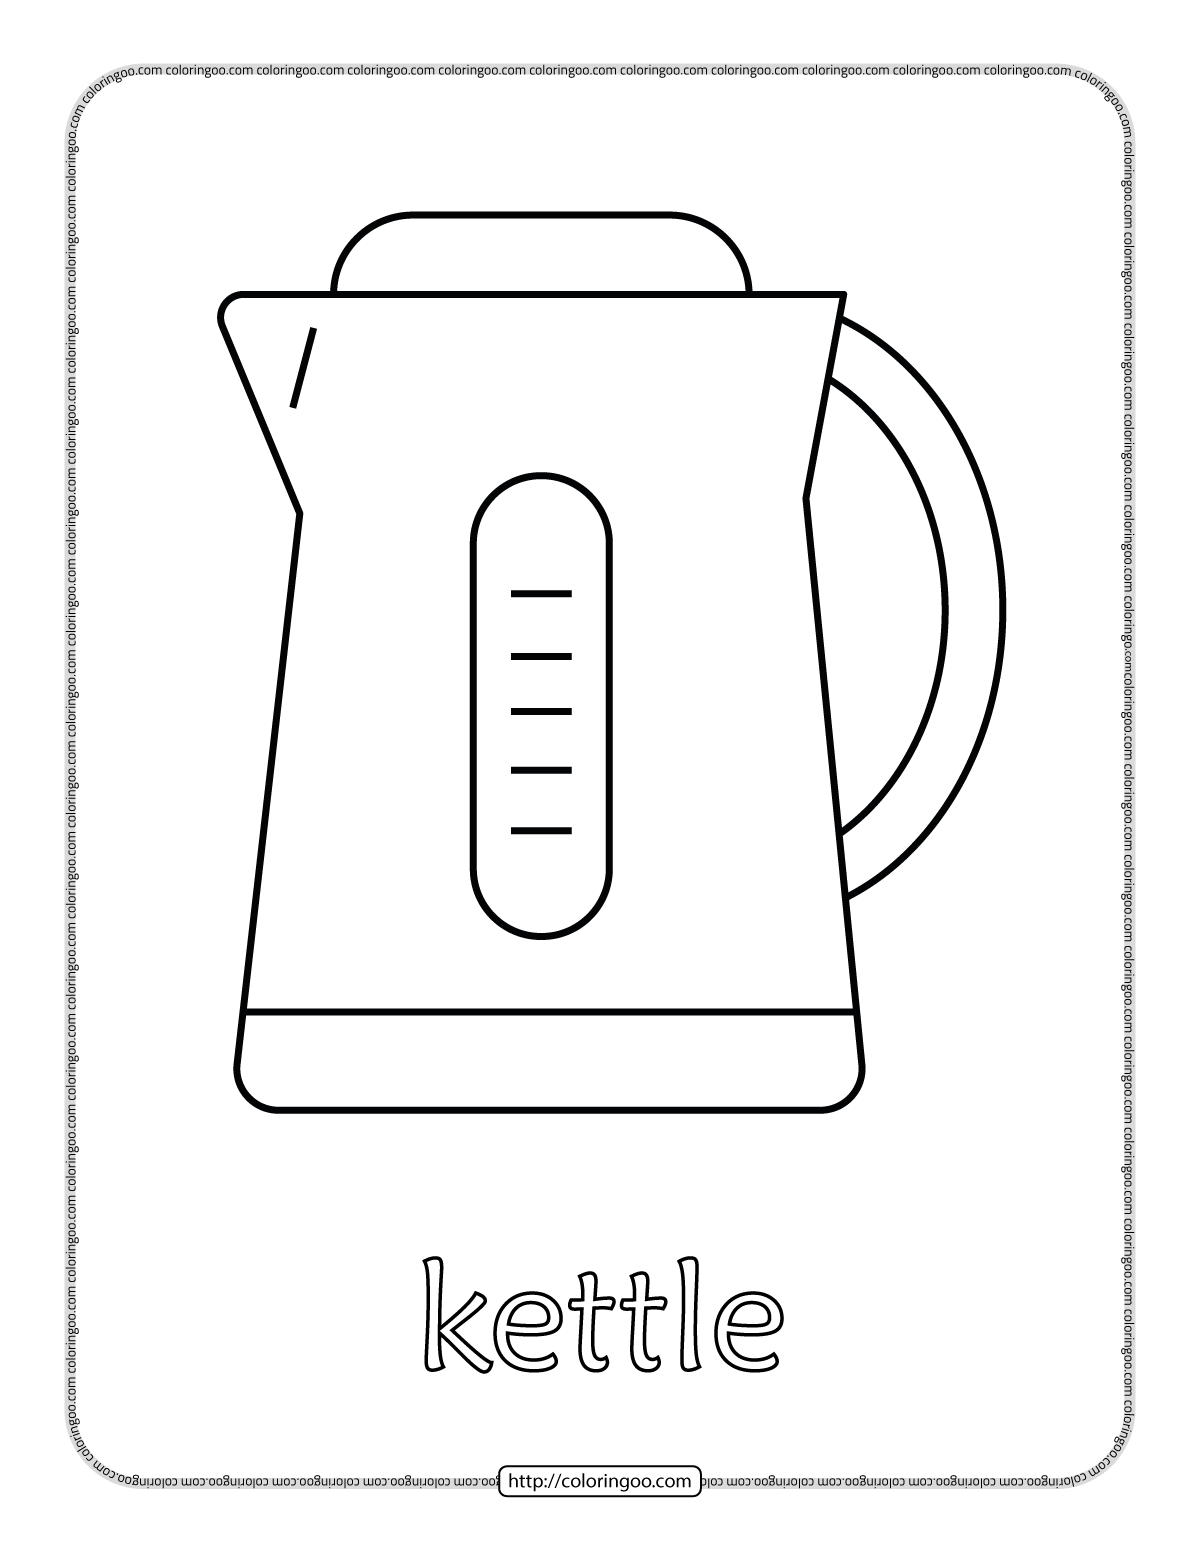 Printable Kettle Coloring Page pdf